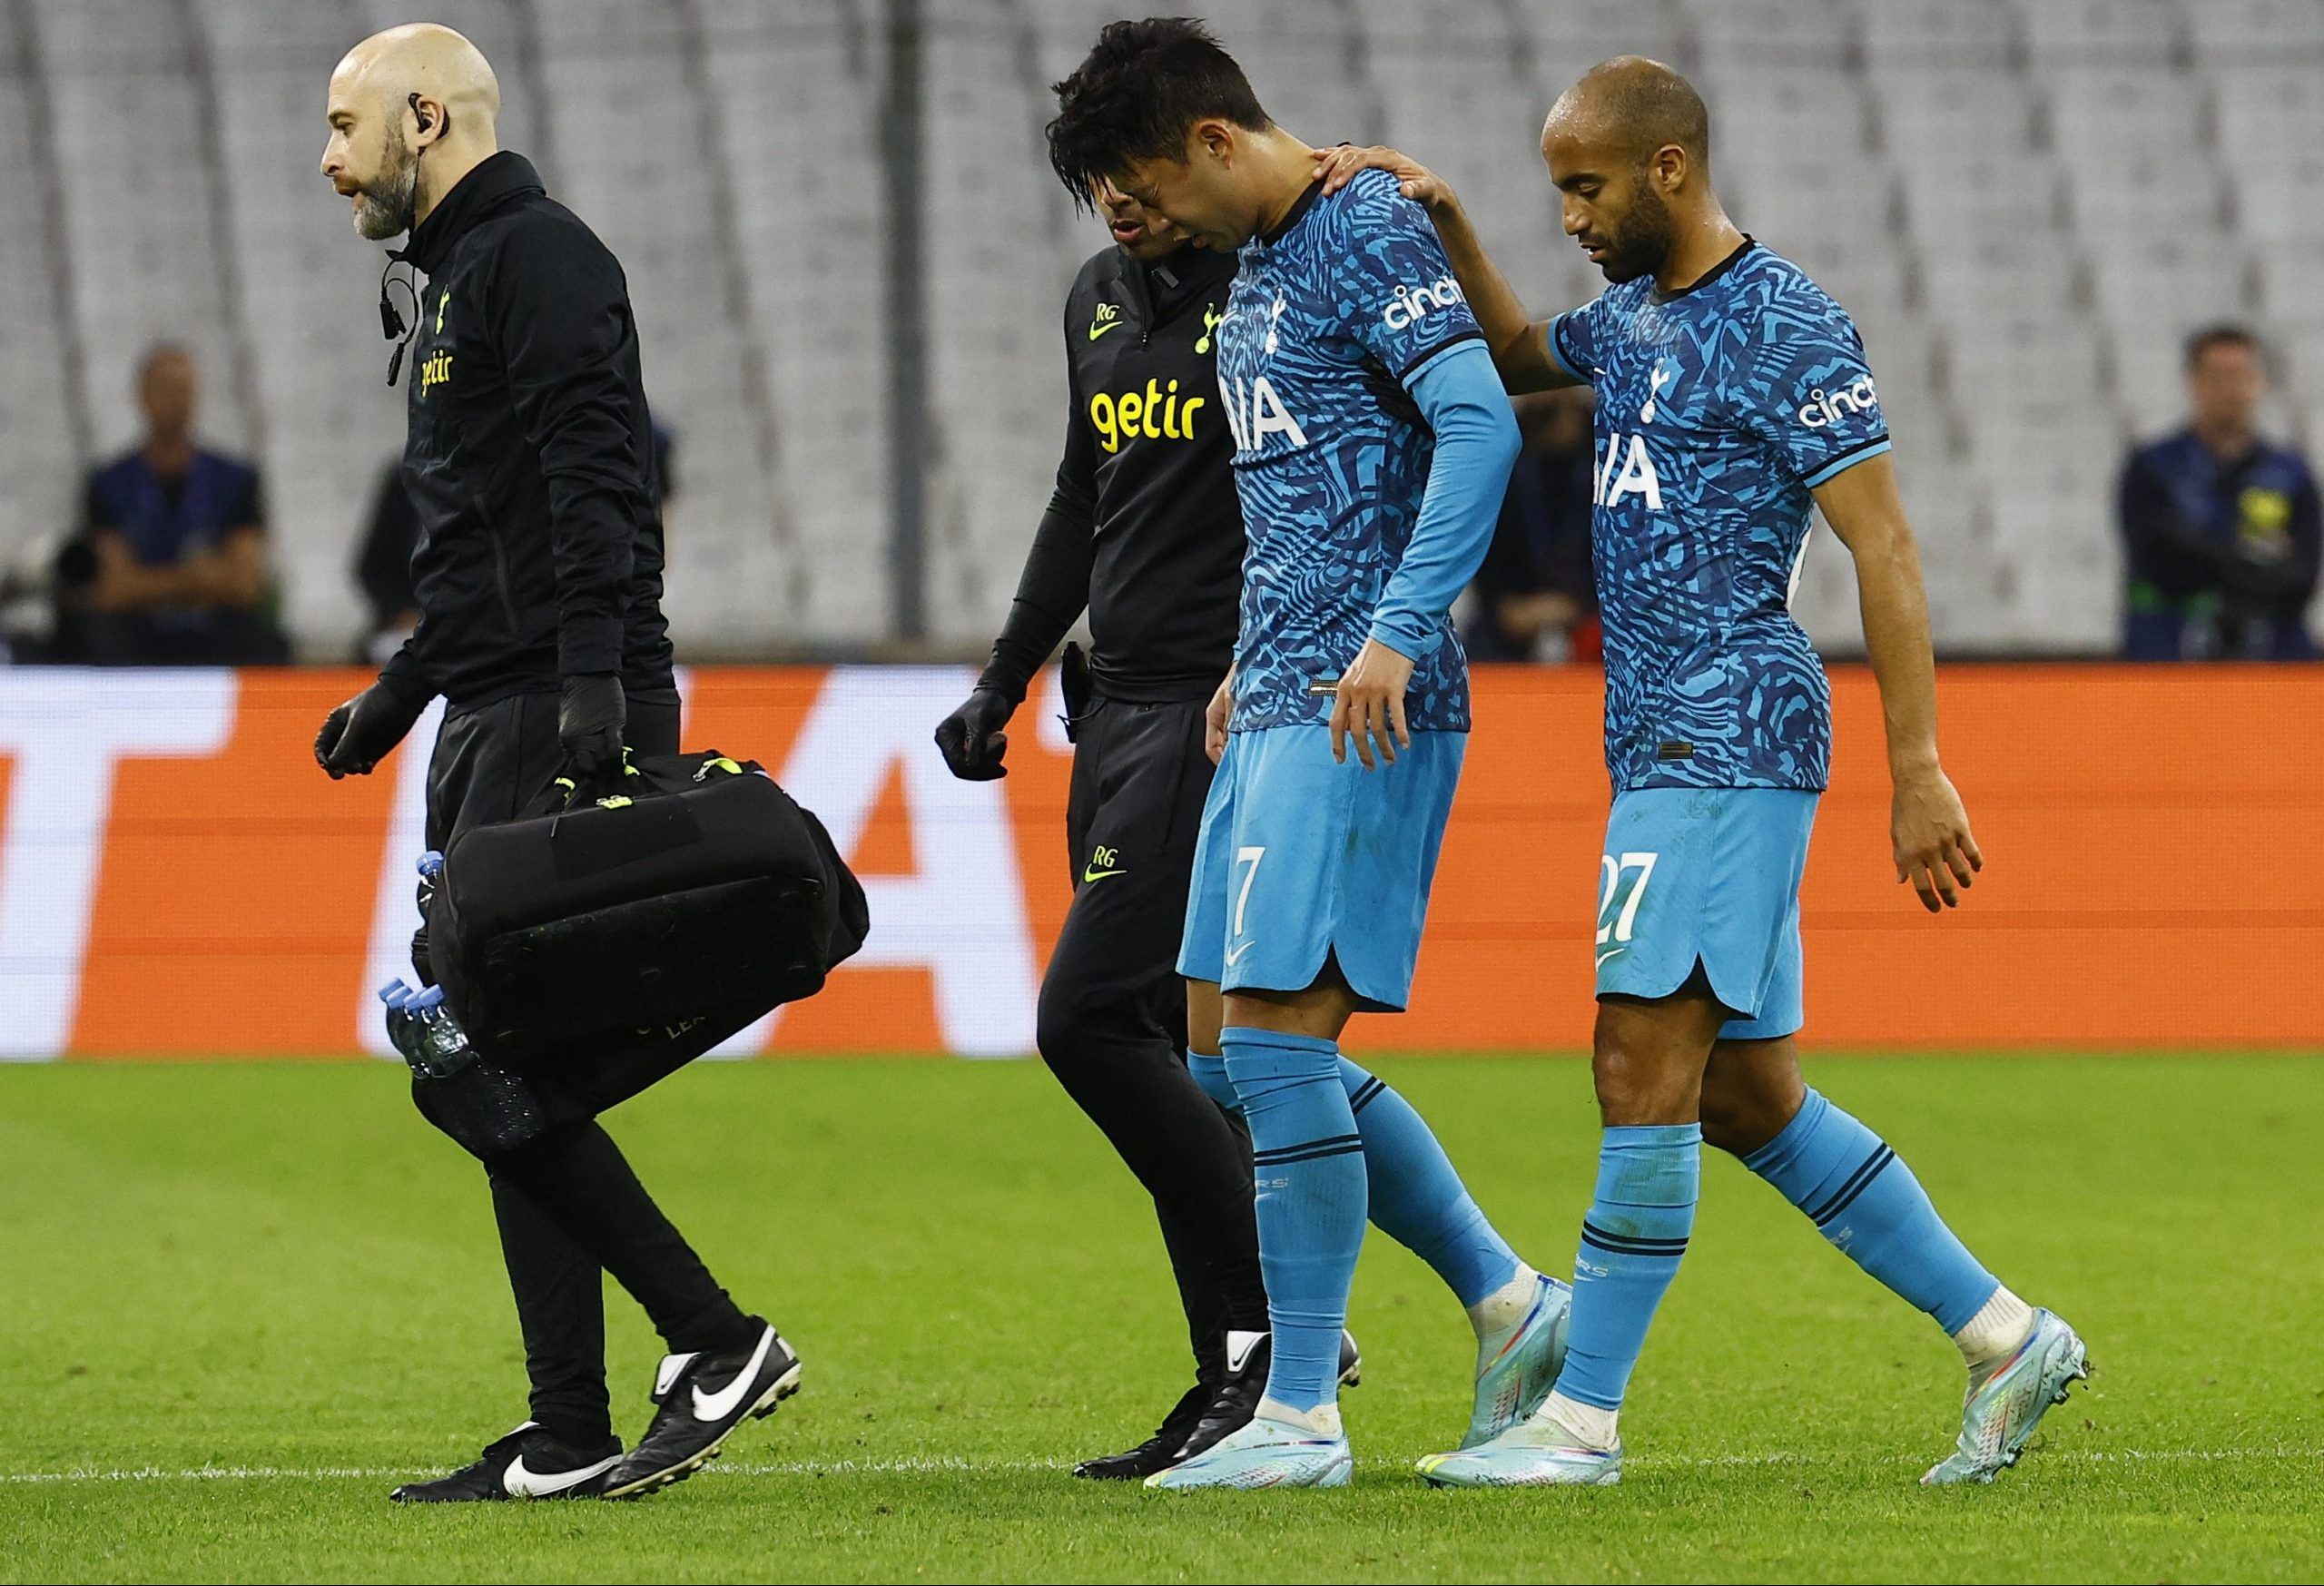 Soccer Football - Champions League - Group D - Olympique de Marseille v Tottenham Hotspur - Orange Velodrome, Marseille, France - November 1, 2022 Tottenham Hotspur's Son Heung-min is helped off the pitch after sustaining an injury REUTERS/Eric Gaillard